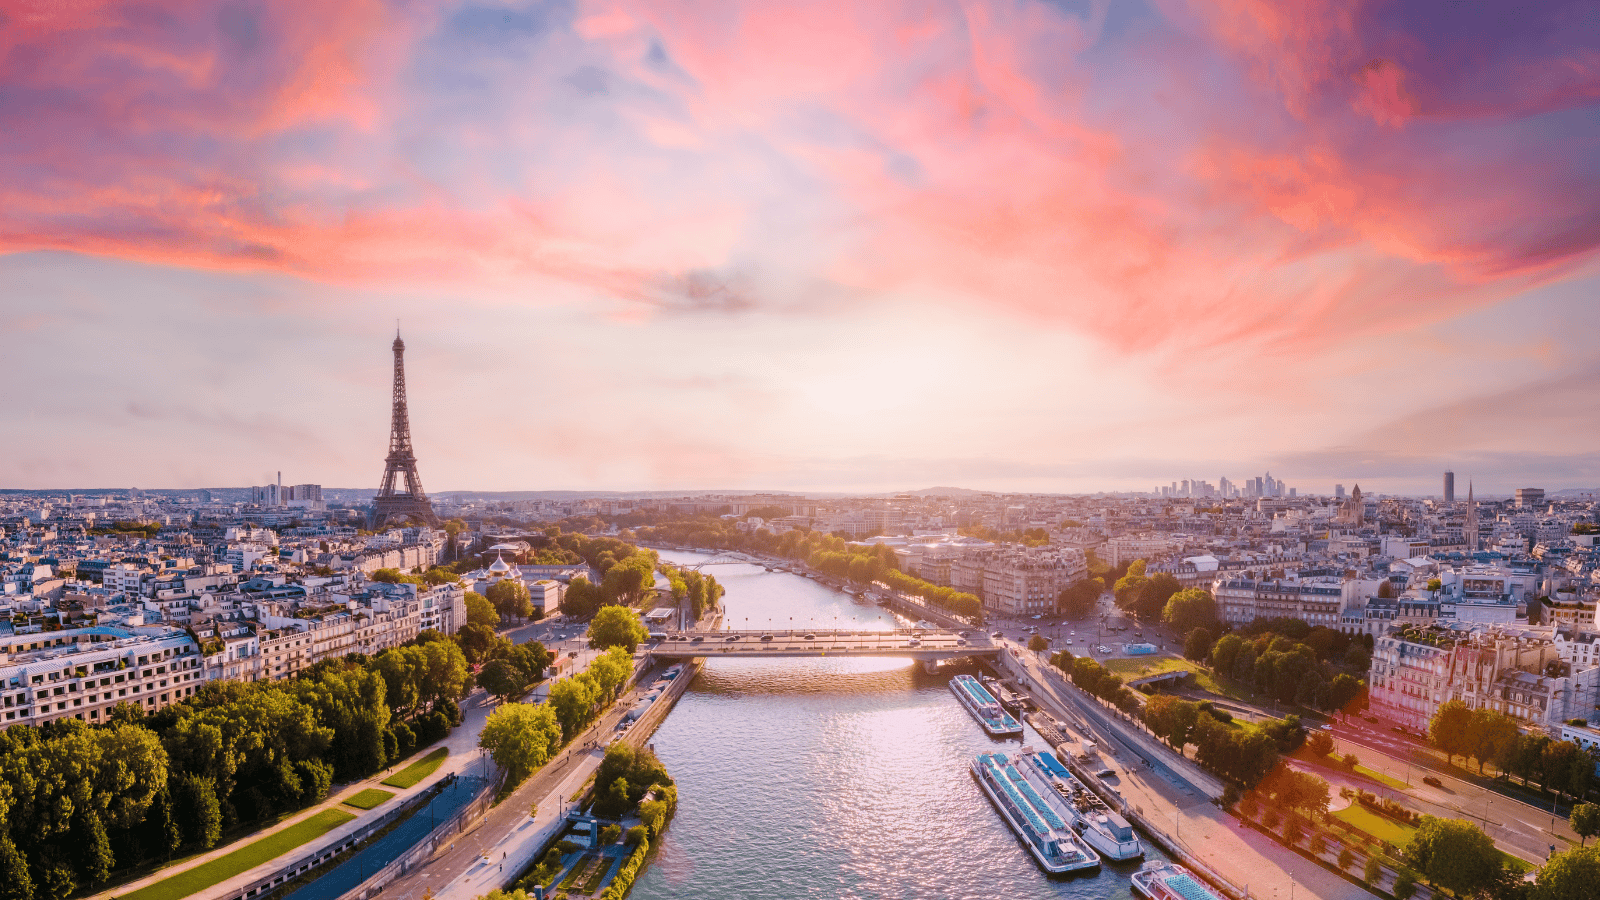 <p>France is a notoriously expensive destination, but you can save by booking in May. The weather tends to be warm yet mild, making it ideal for wandering the Paris streets or a <a href="https://whatthefab.com/luxury-river-cruises.html" rel="follow">luxury river cruise</a> down the Seine. Flights to France are often cheaper in May, which is a shoulder season for tourism. As a result, <a href="https://travel.usnews.com/Paris_France/When_To_Visit/" rel="nofollow external noopener noreferrer">U.S. News Travel</a> shares that travelers can frequently score hotel room price cuts throughout the month.</p>